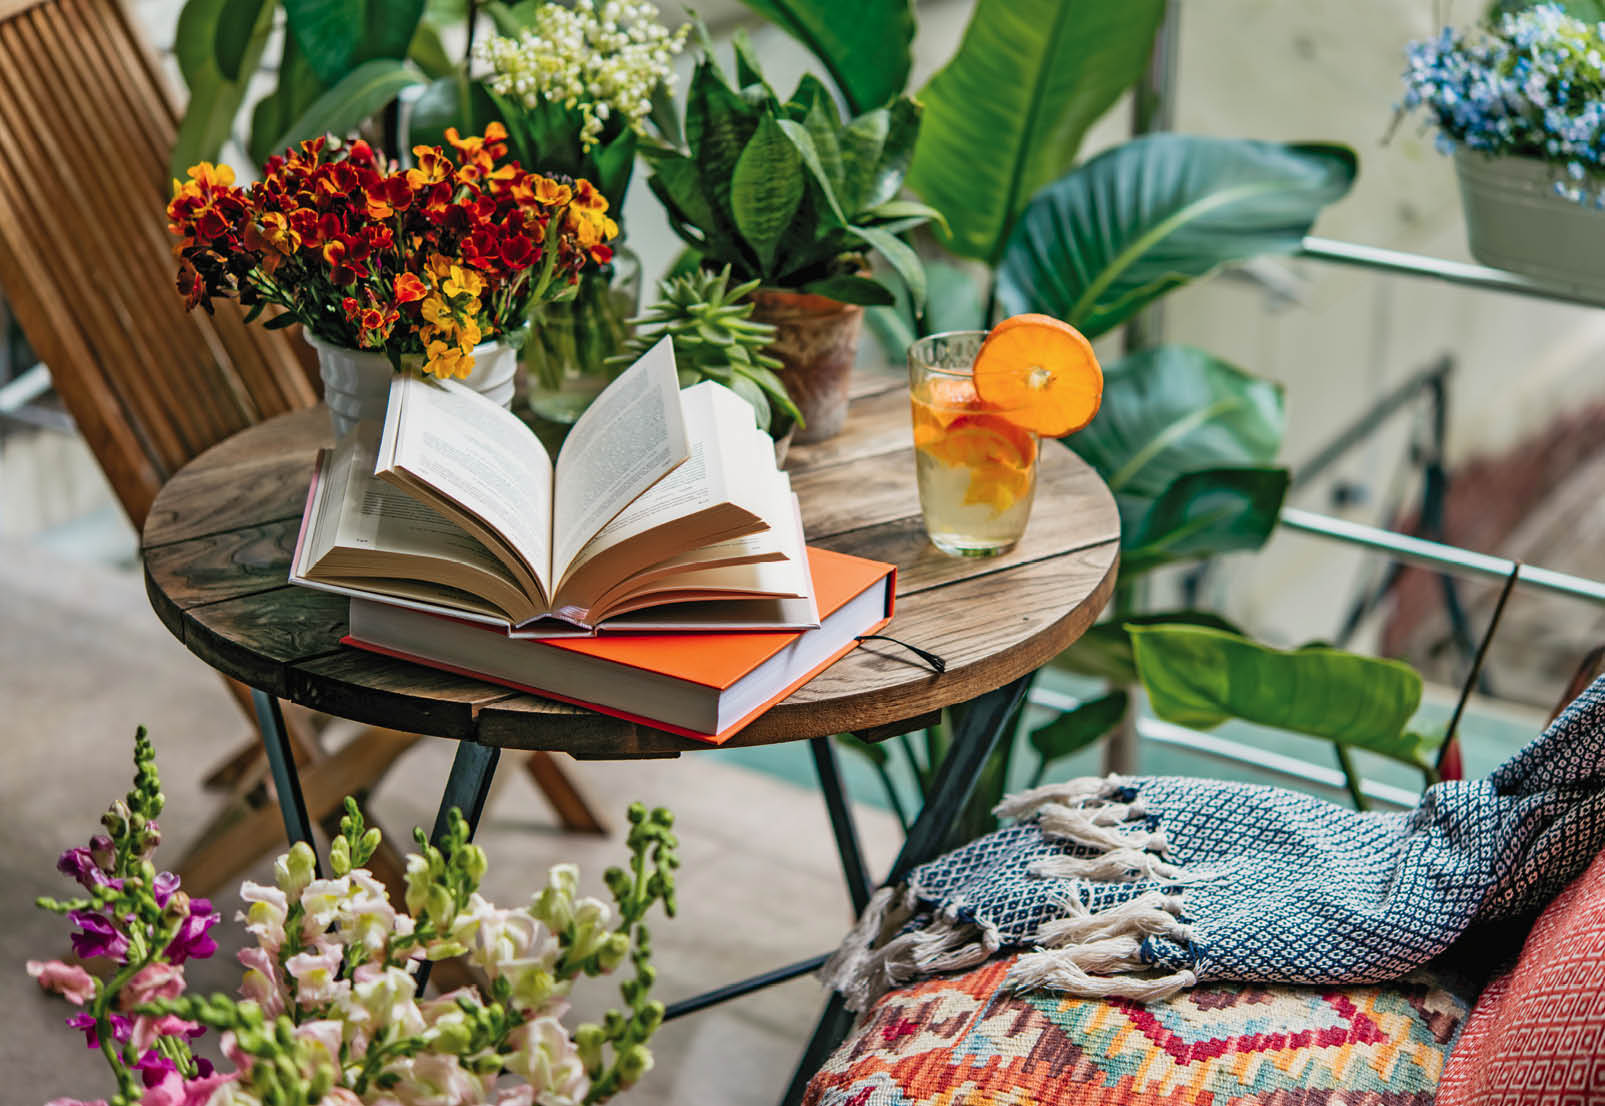 Reading books in summer at a beautiful terrace or cozy balcony full of green plants.